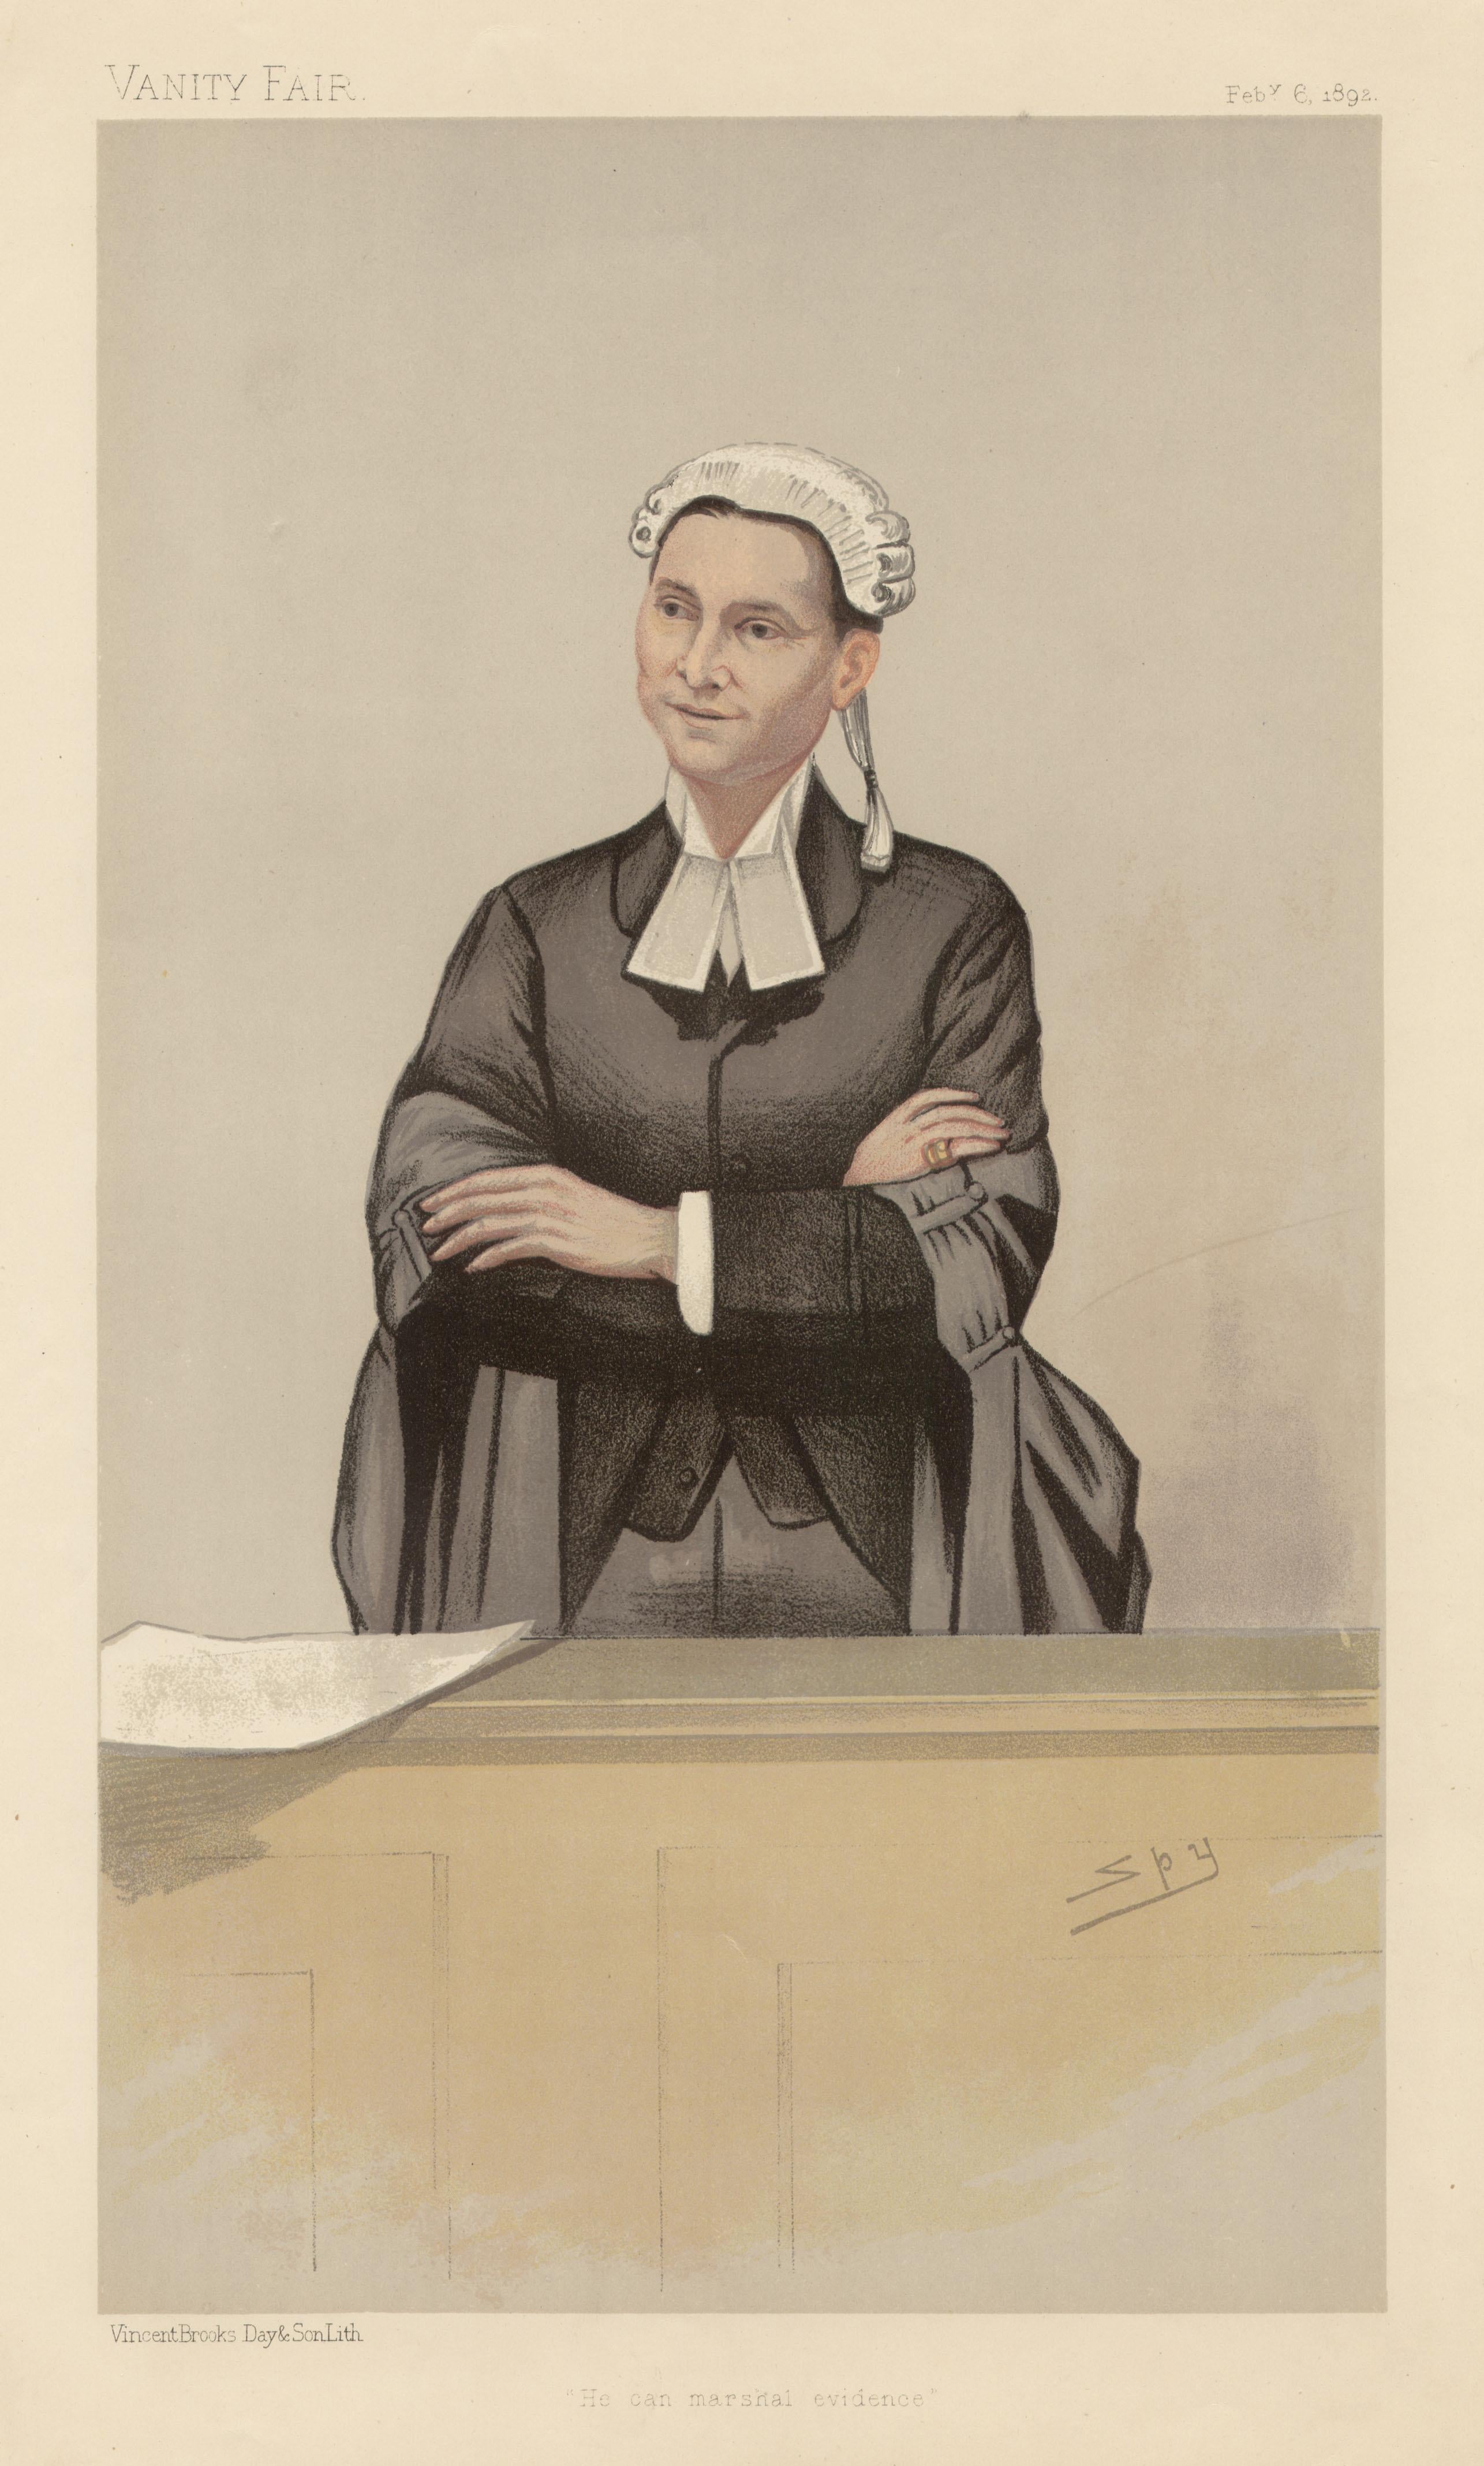 Sir Leslie Ward Figurative Print - He can marshal evidence, Vanity Fair legal chromolithograph of a judge, 1892